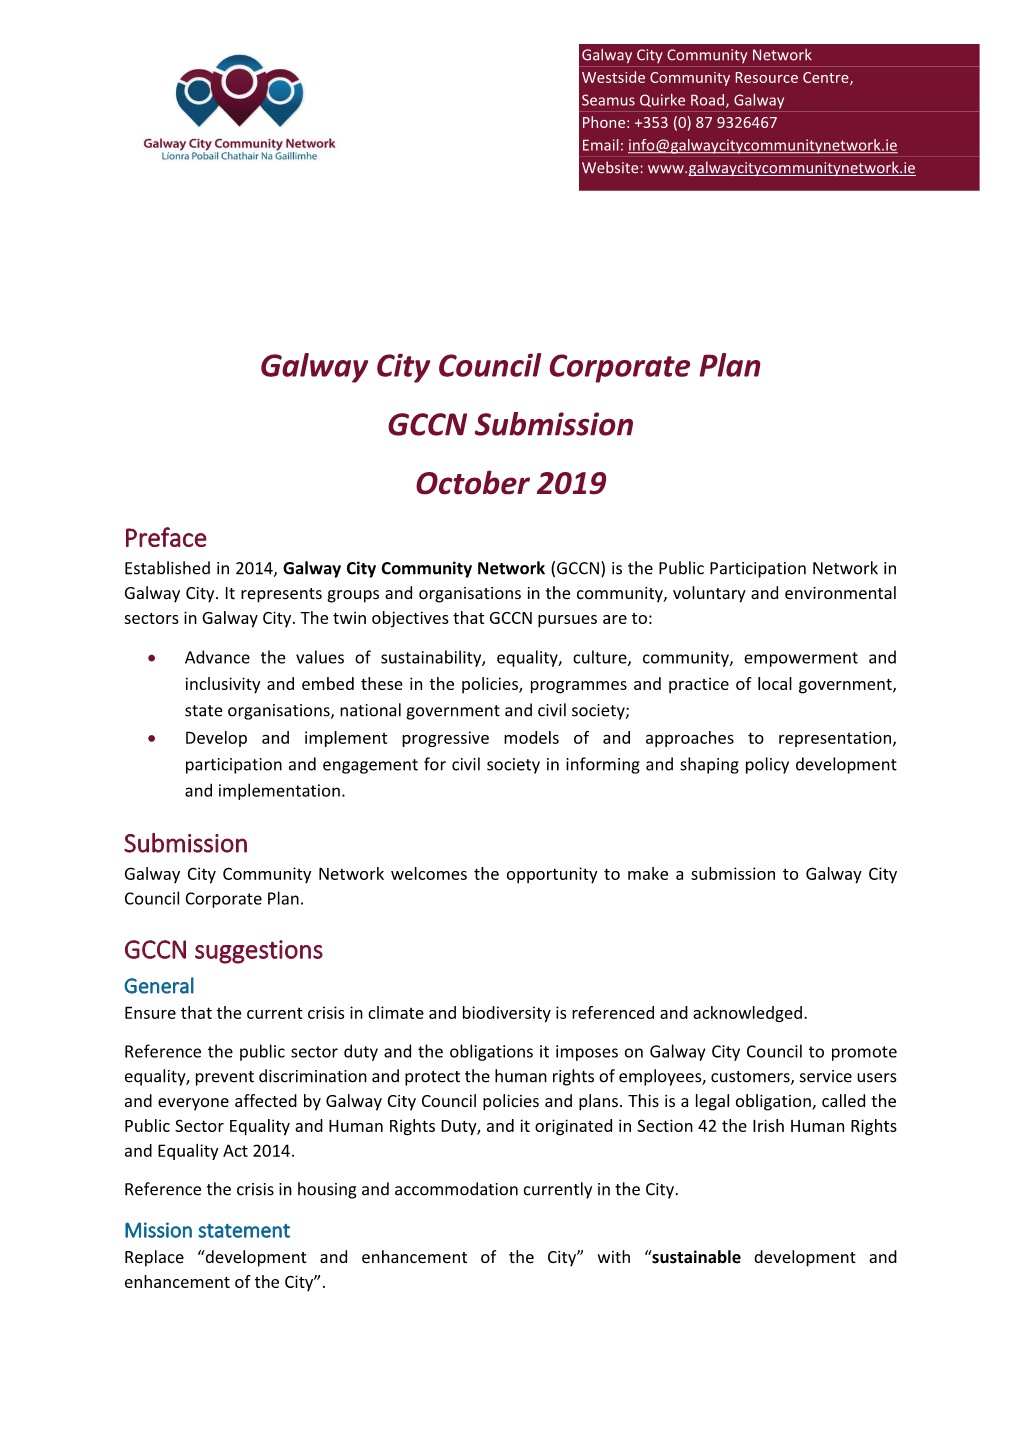 Galway City Council Corporate Plan GCCN Submission October 2019